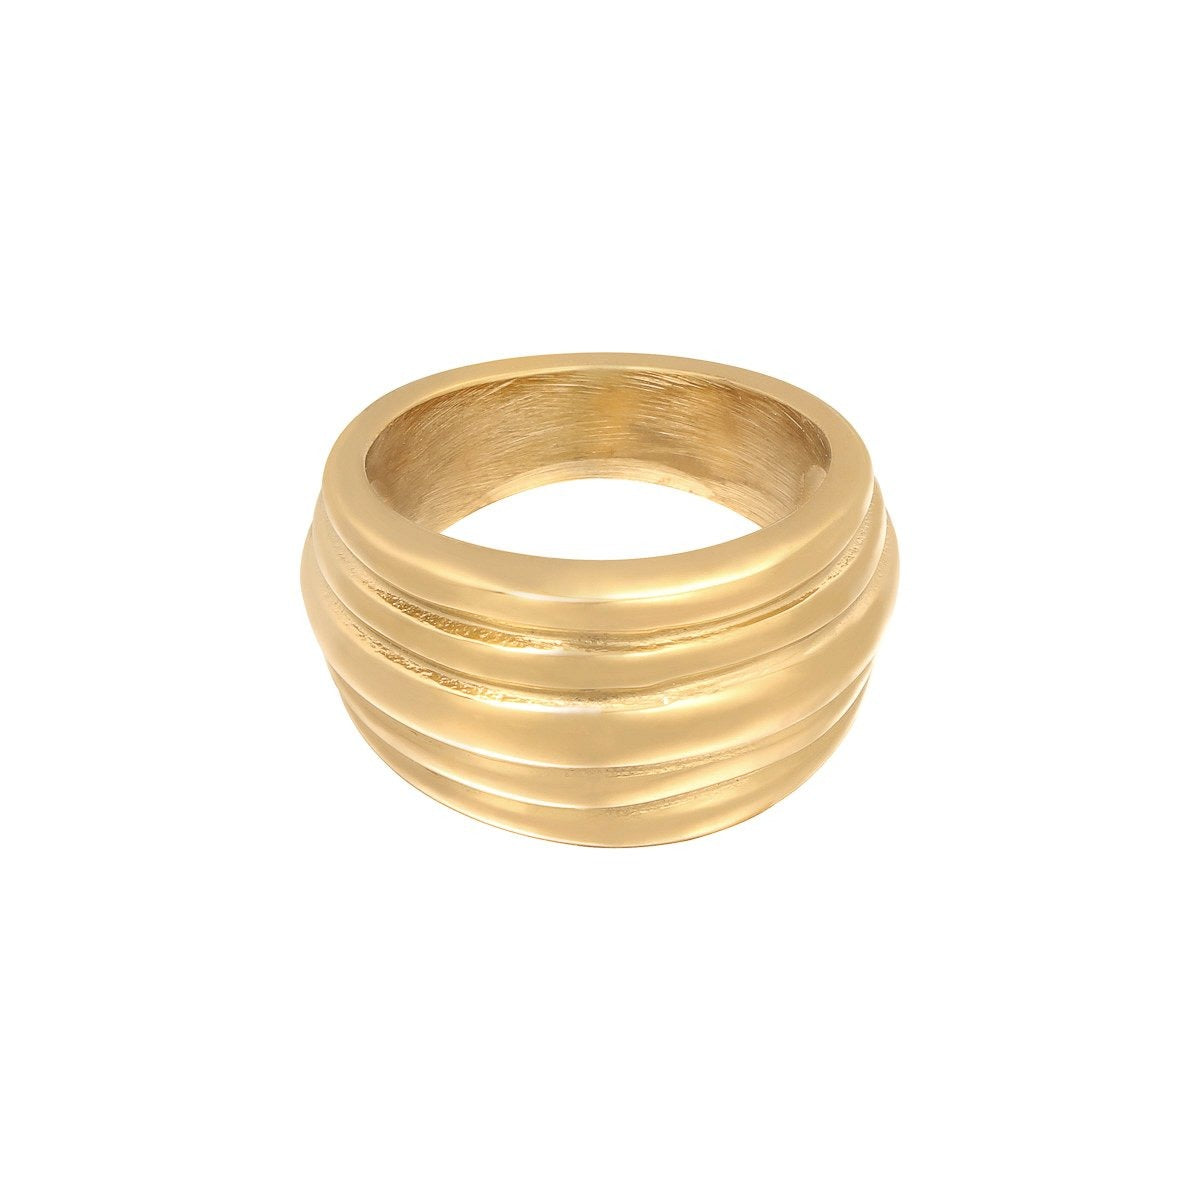 Amélie Ring Gold and Silver - new arrivals, Rings, Rings Gold, Rings Silver - Amélie Ring Gold and Silver - ANNABO Online Store